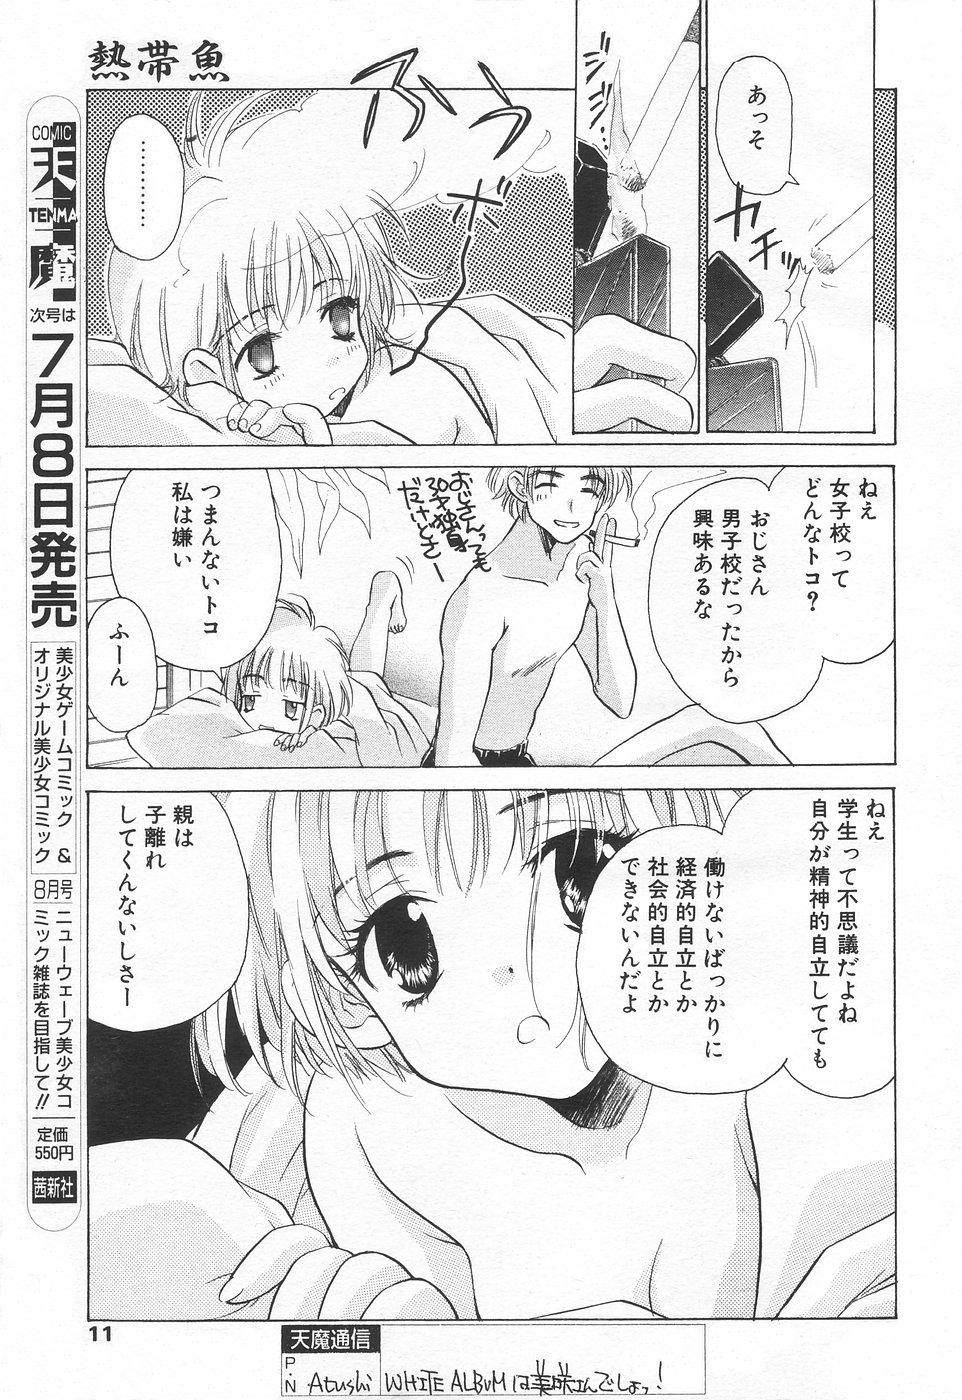 Animation COMIC Tenma 1998-07 Sister - Page 11